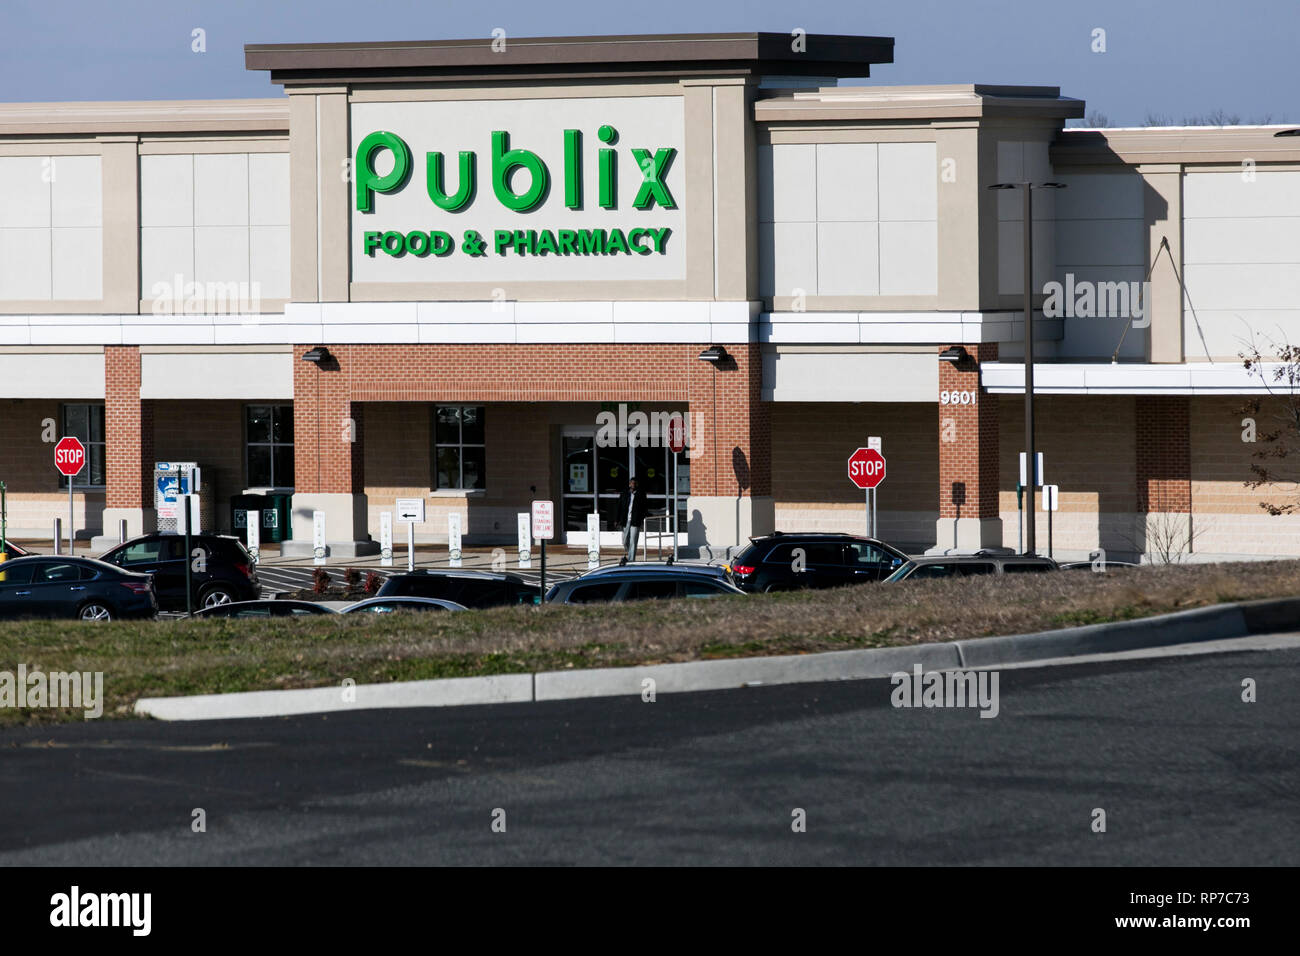 A logo sign outside of a Publix grocery store location in Fredericksburg, Virginia on February 19, 2019. Stock Photo